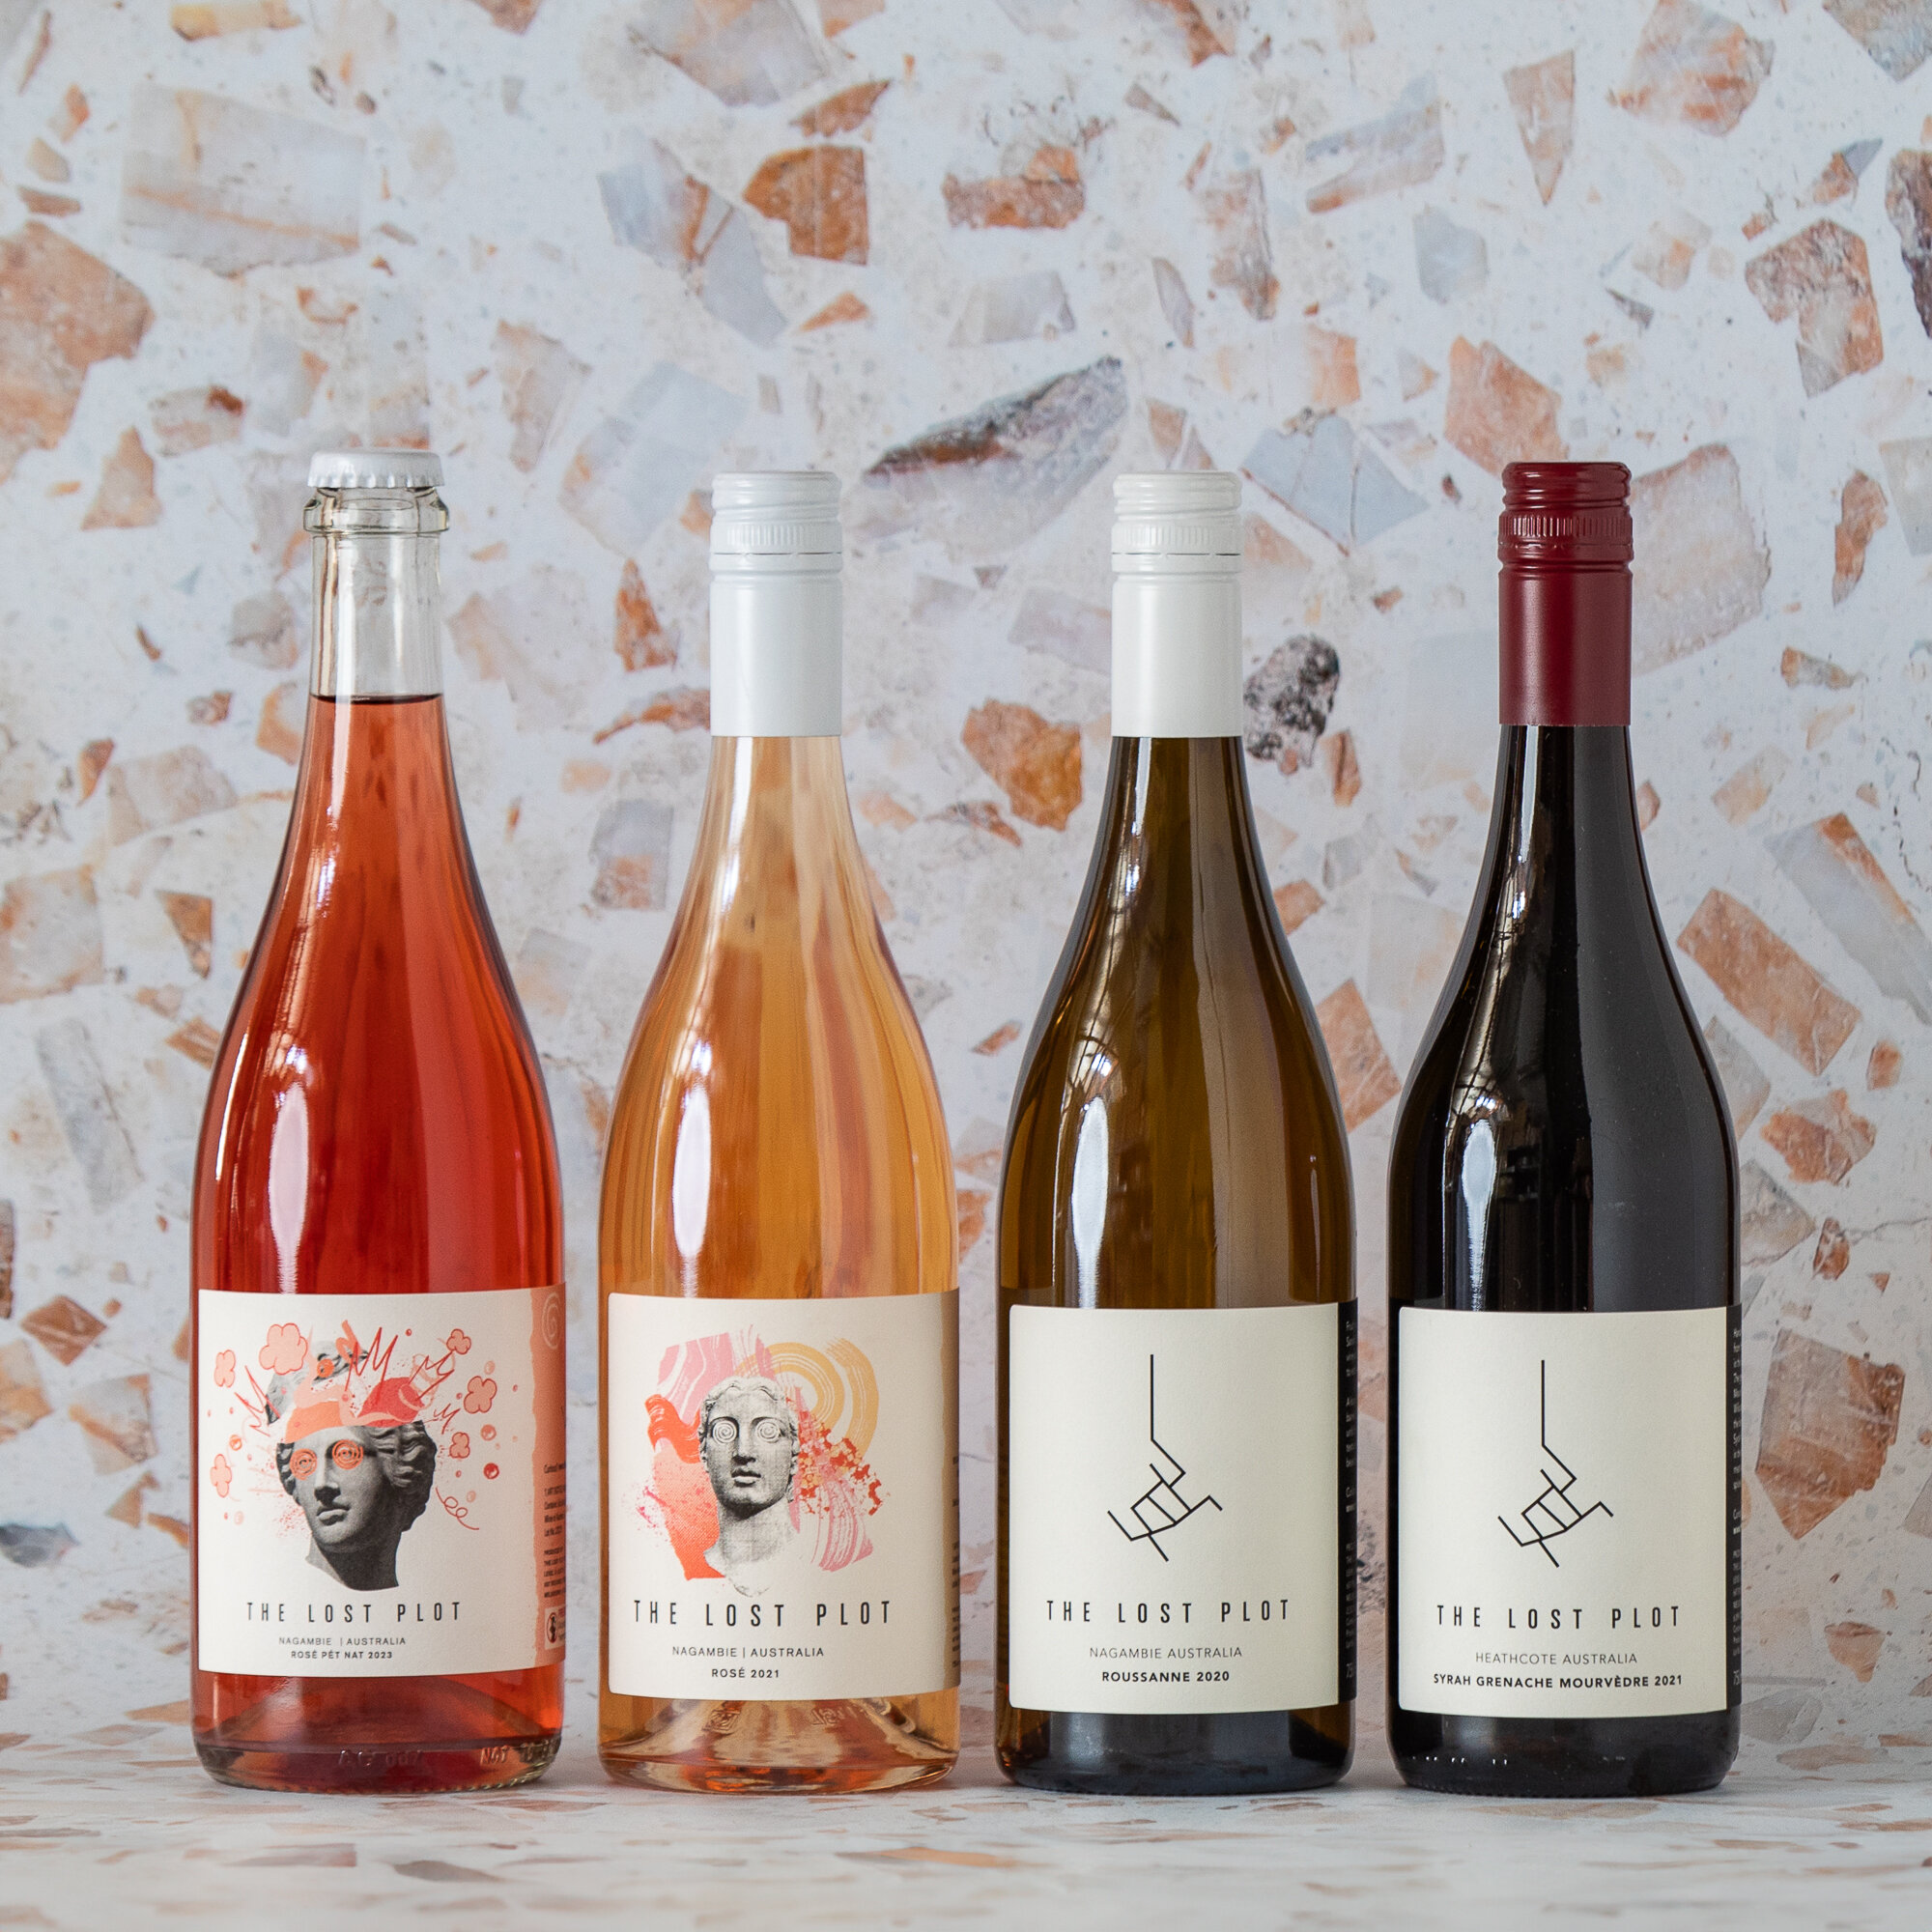 THE LOST PLOT - VICTORIA
The Lost Plot is about finding excellent fruit from talented growers and turning it into great, approachable wines. 

Matt Campbell has been making the Lost Plot wines since 2019. His approach of gentle handling to produce wi